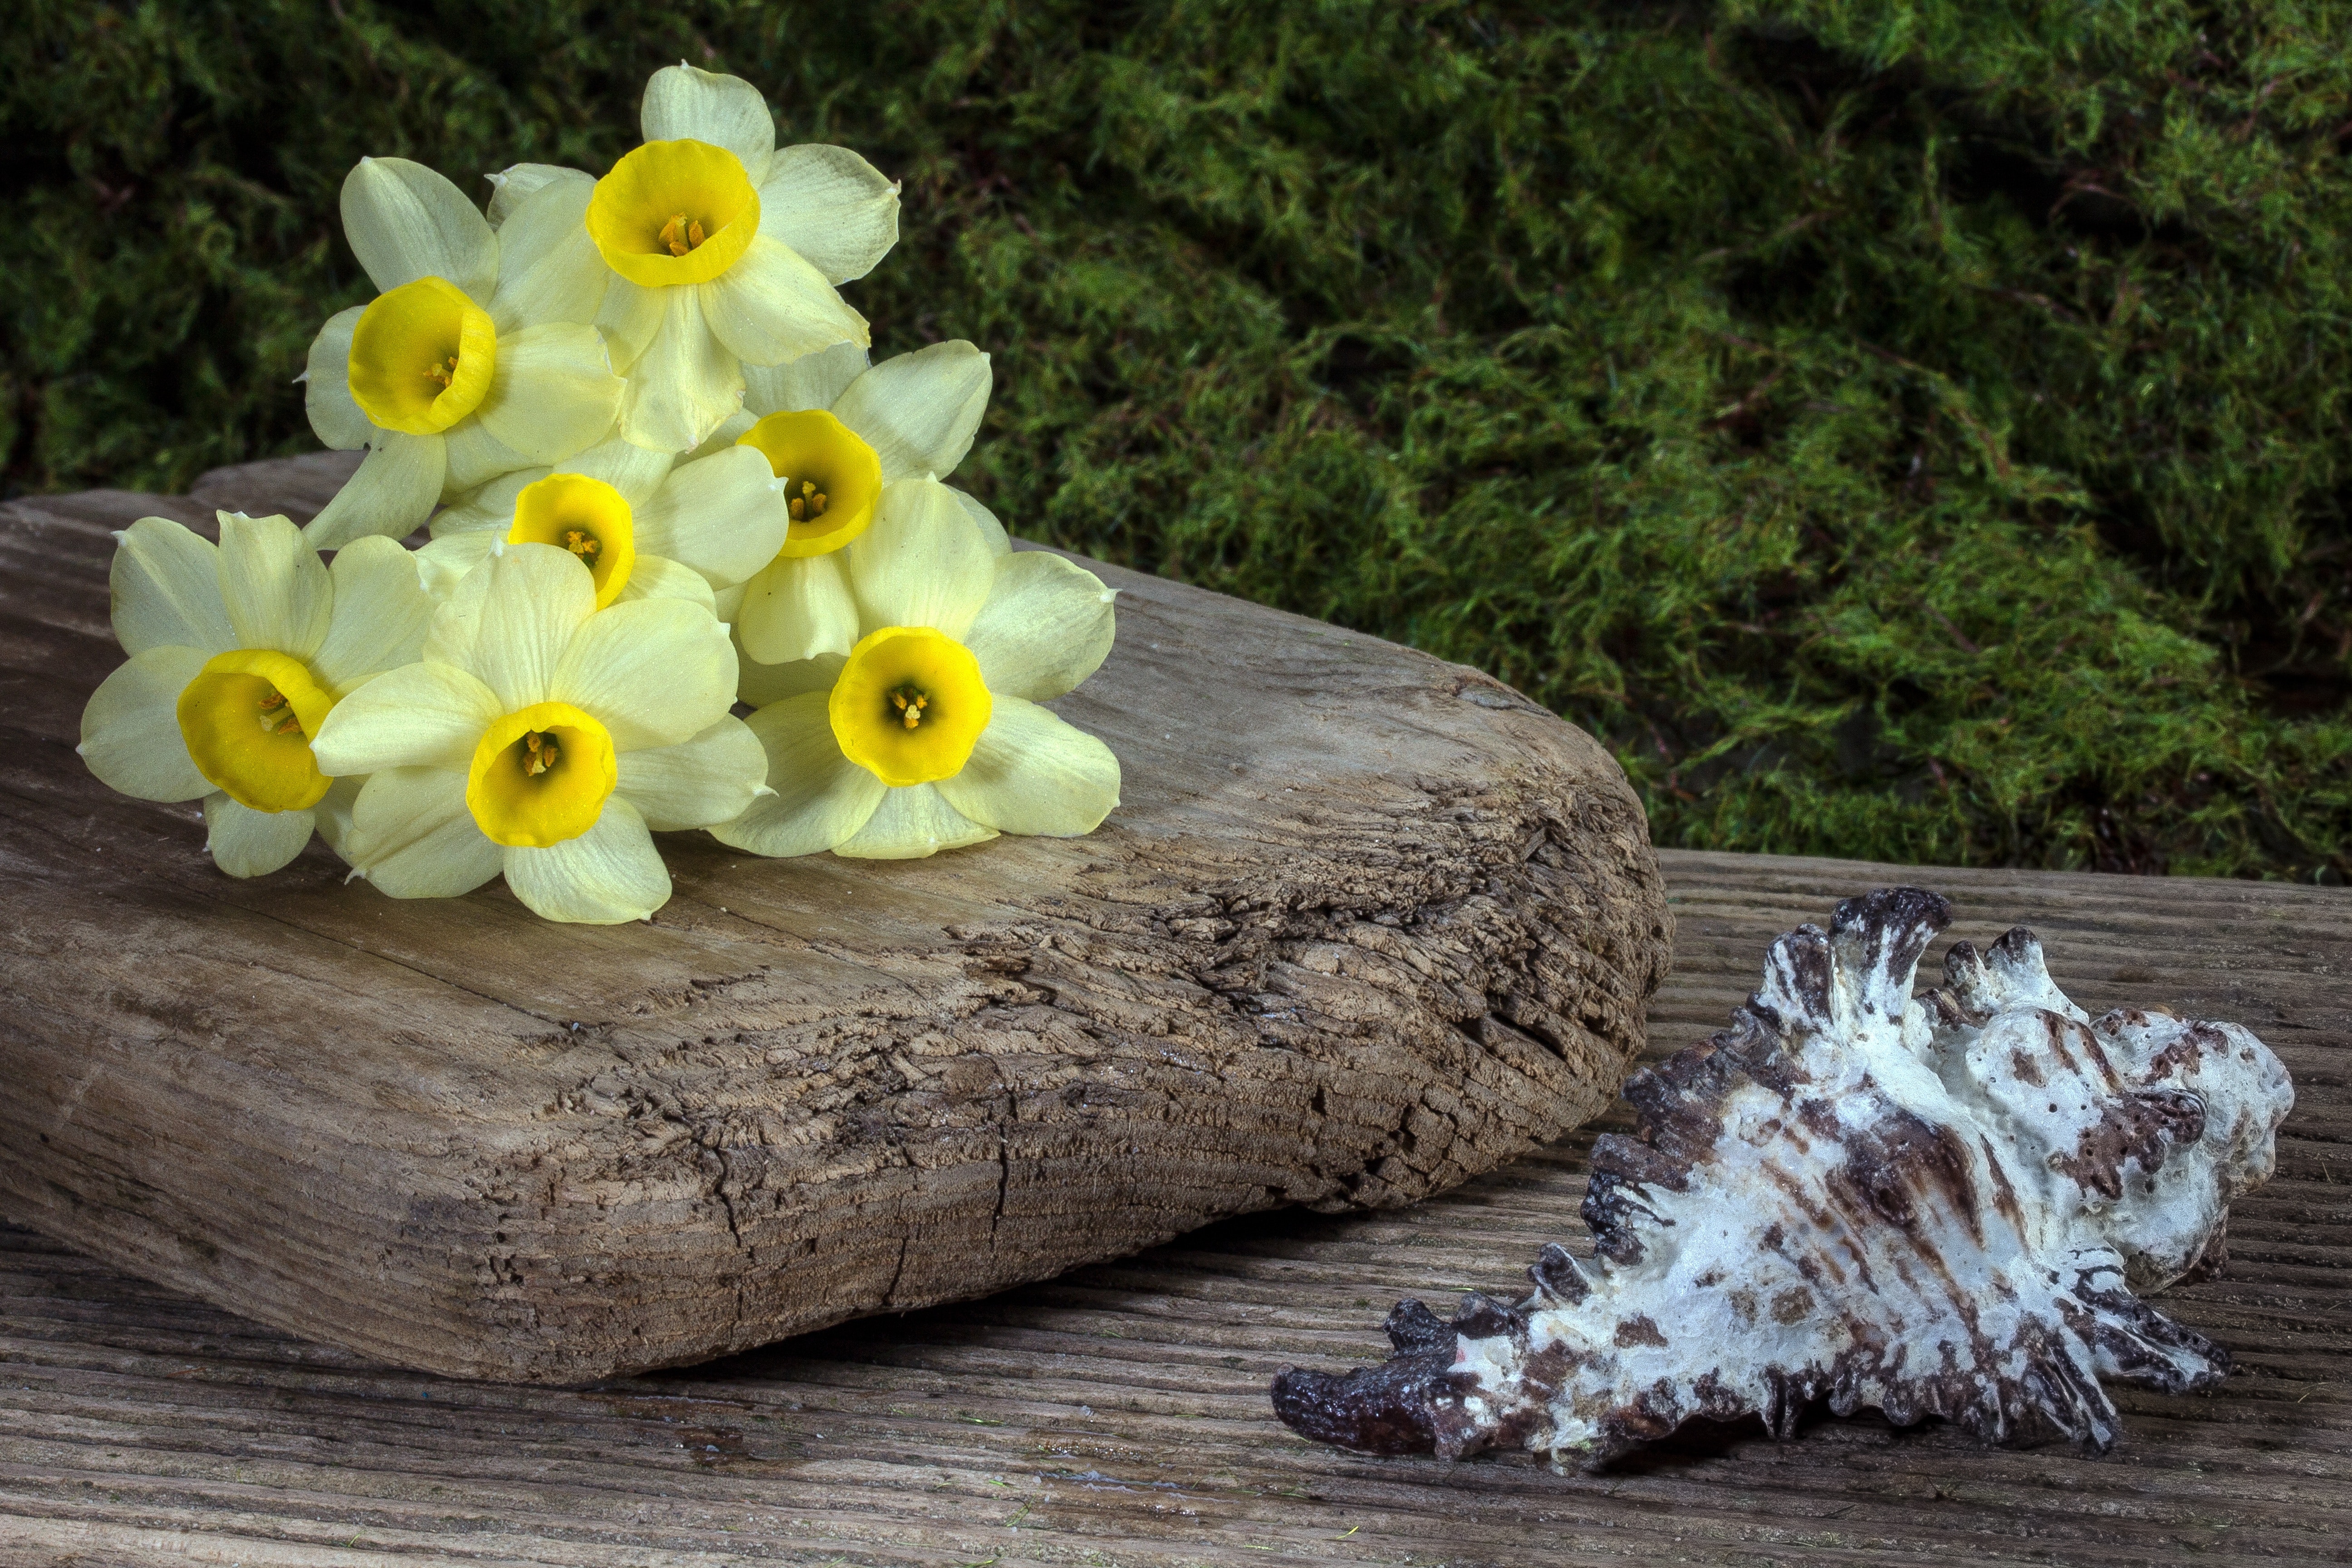 Yellow Flower on Wooden Plank Beside White Shell, Background, Beautiful, Close-up, Color, HQ Photo